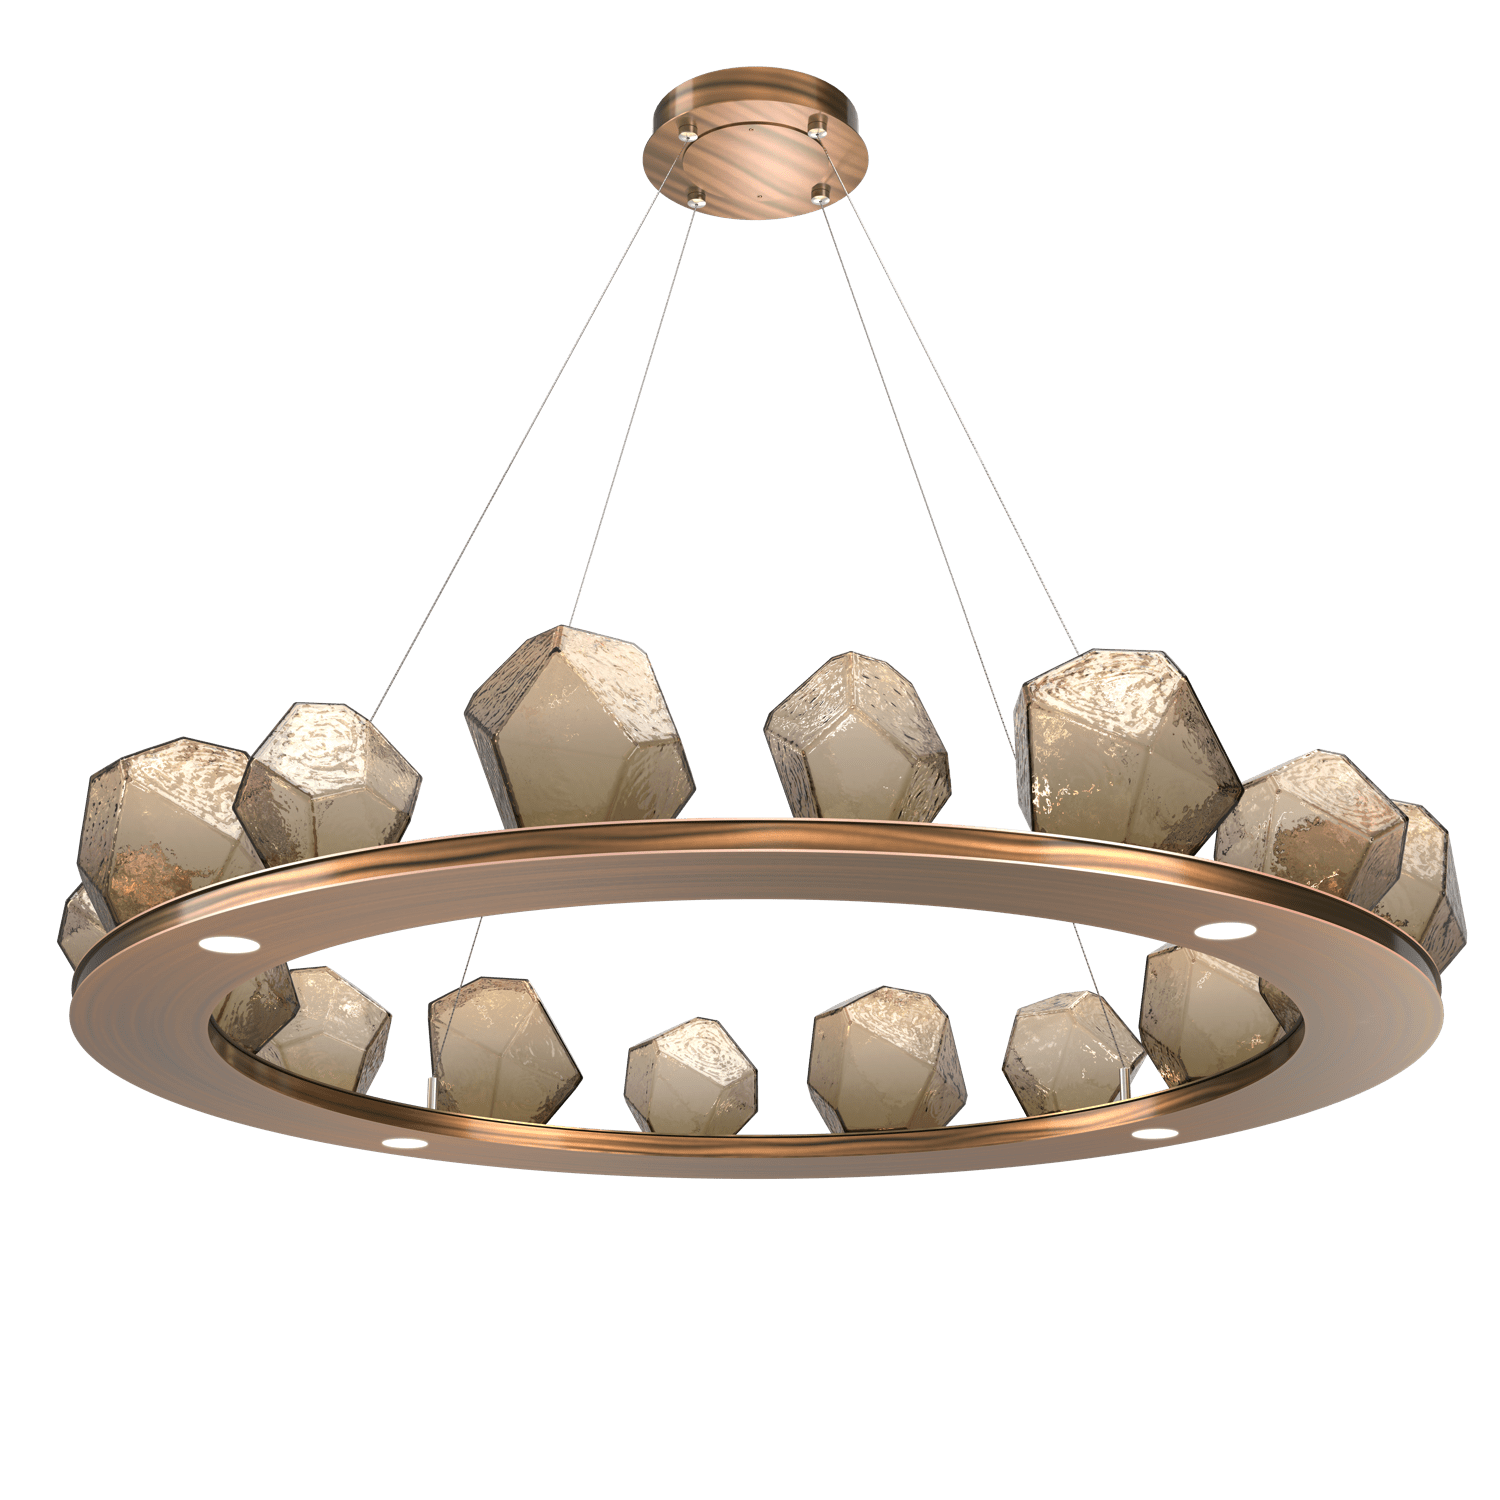 CHB0039-0D-RB-B-Hammerton-Studio-Gem-48-inch-ring-chandelier-with-oil-rubbed-bronze-finish-and-bronze-blown-glass-shades-and-LED-lamping